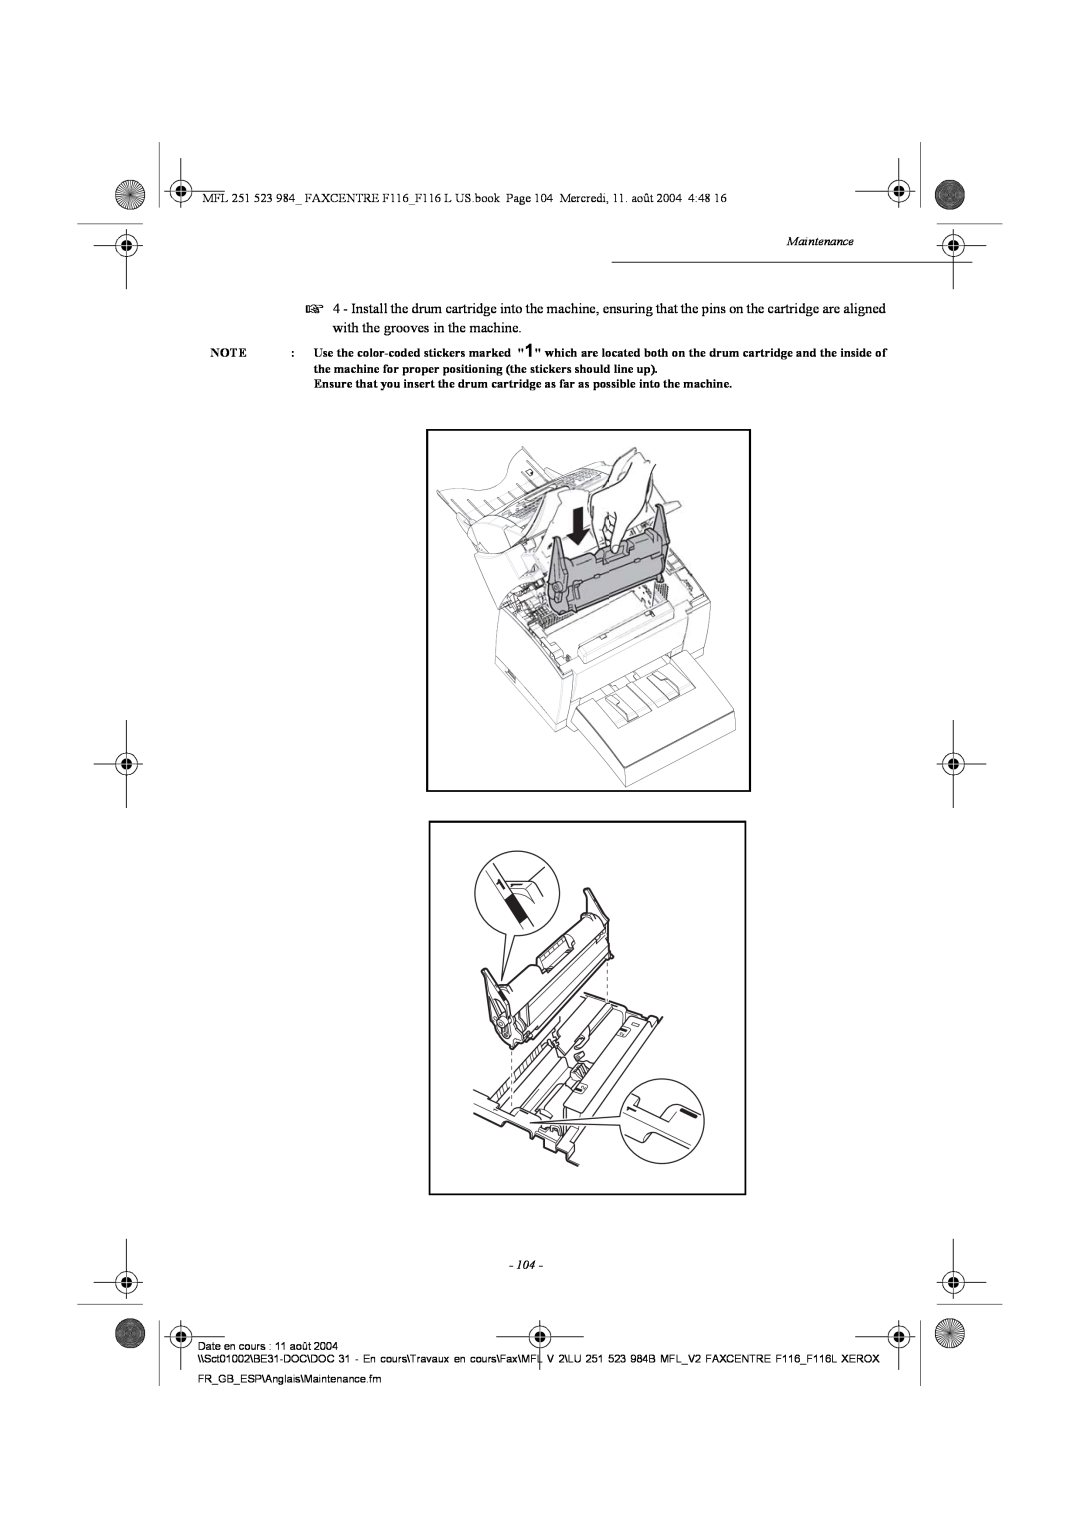 Xerox F116 user manual with the grooves in the machine, Maintenance 